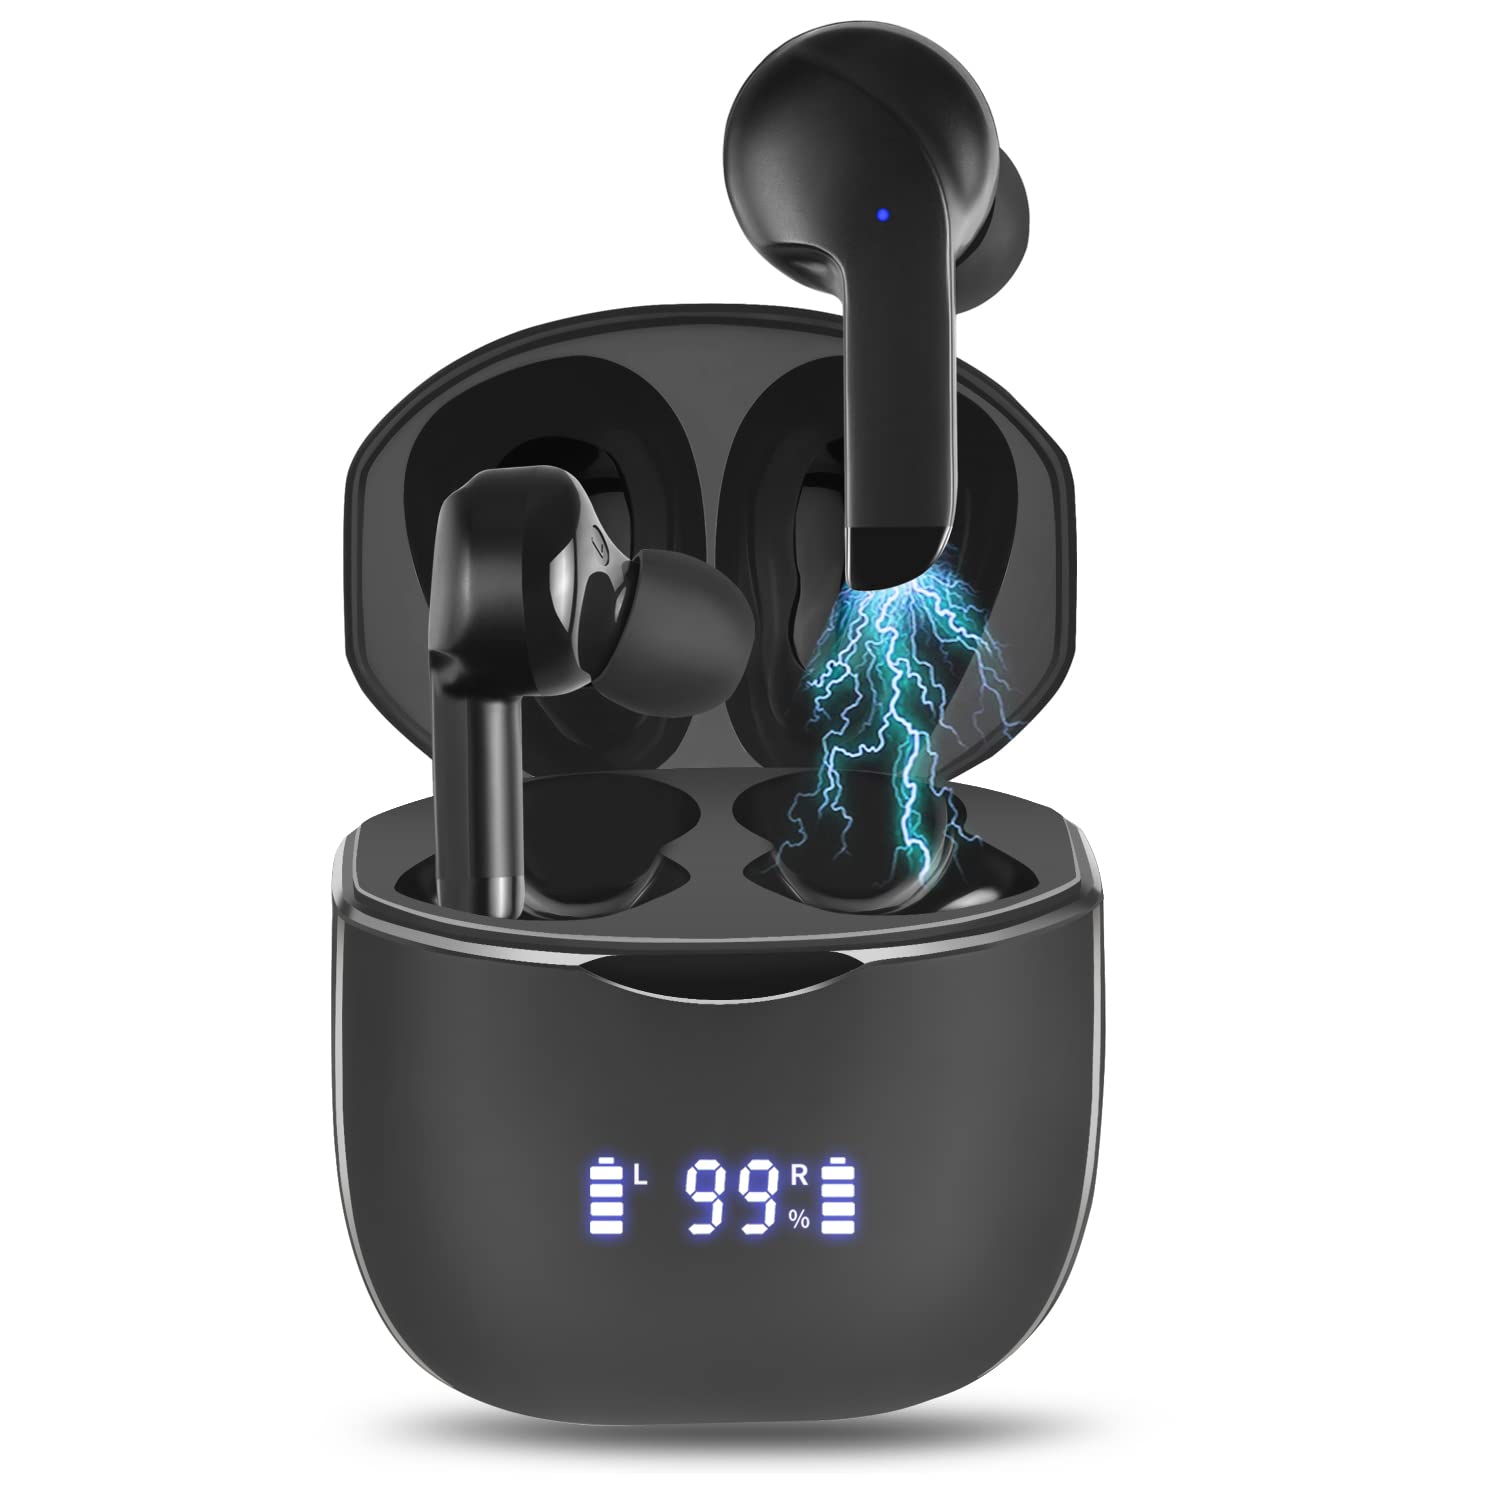 connecting-wireless-earbuds-to-your-android-device